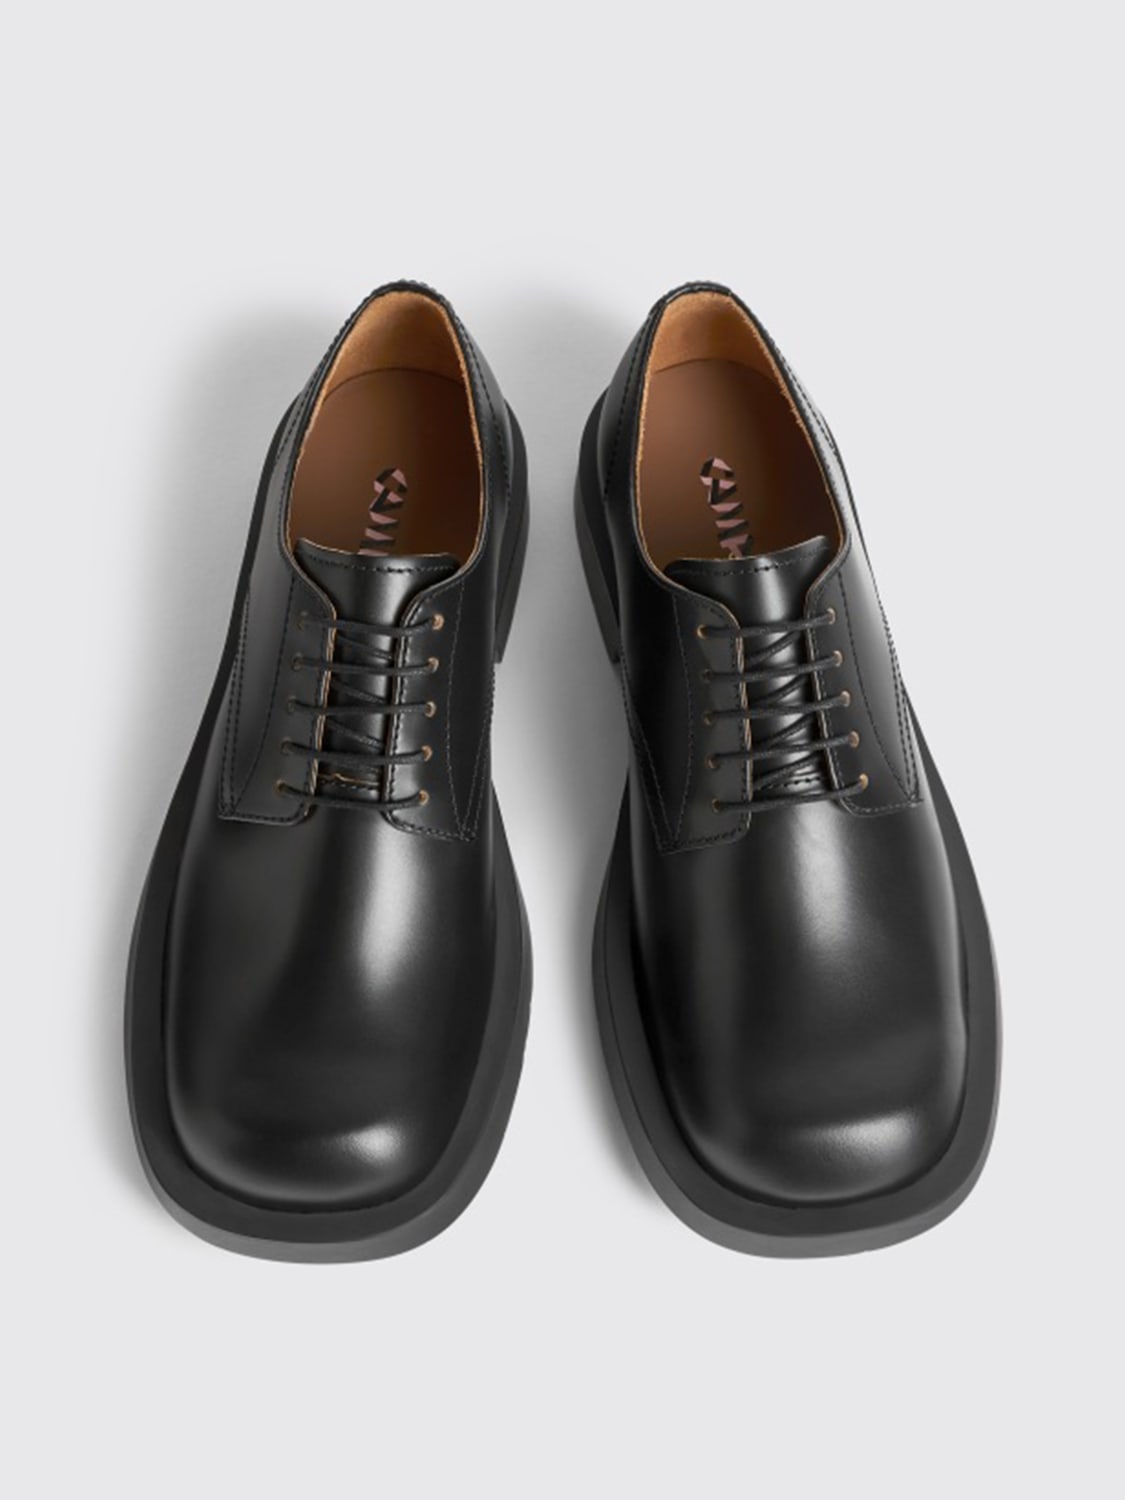 Mil 1978 CamperLab derby shoes in leather